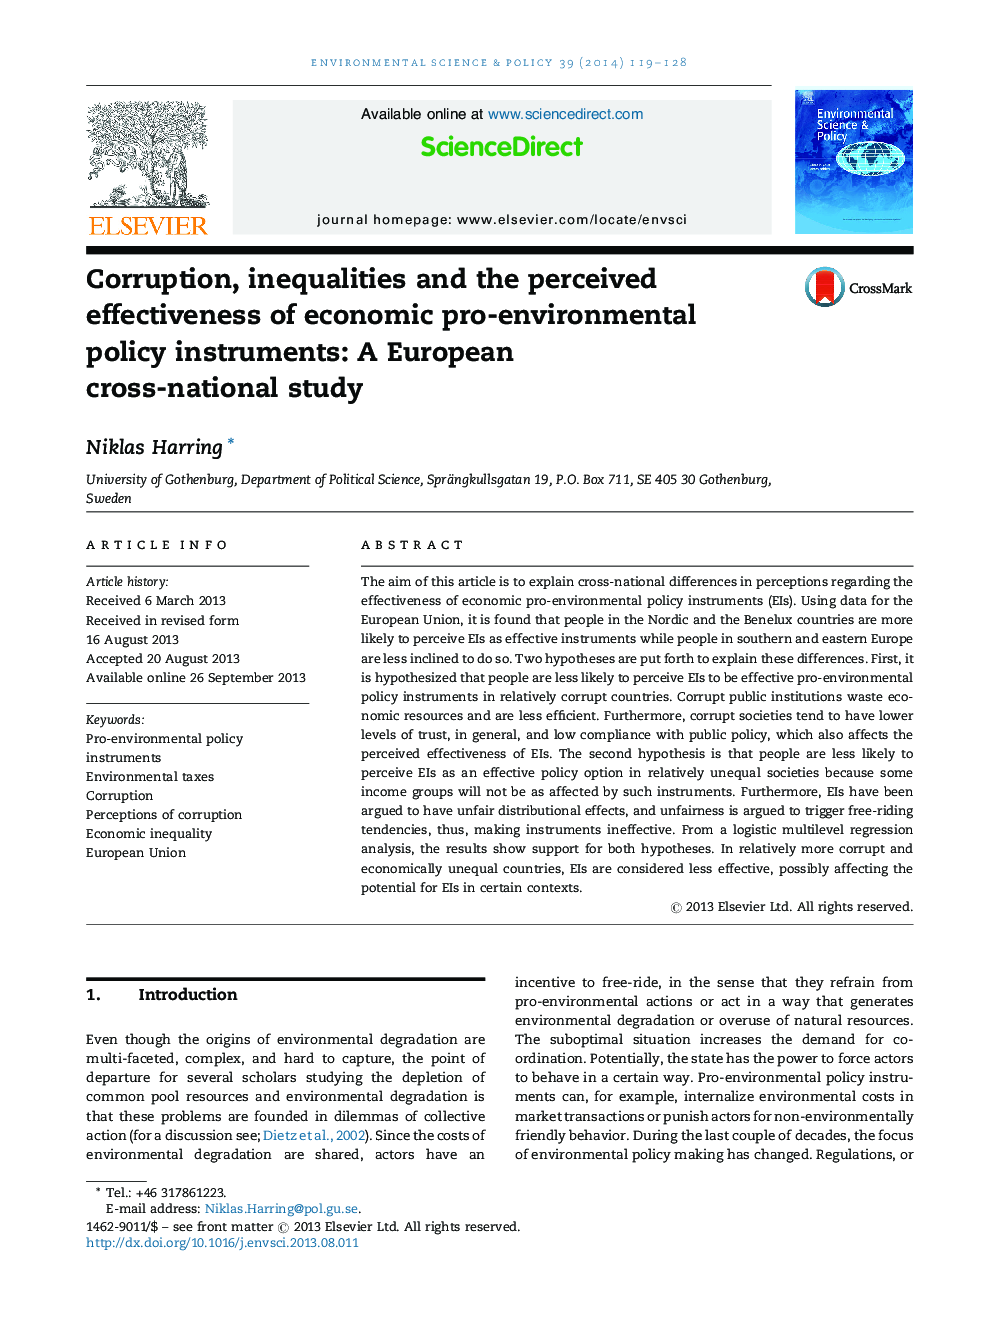 Corruption, inequalities and the perceived effectiveness of economic pro-environmental policy instruments: A European cross-national study